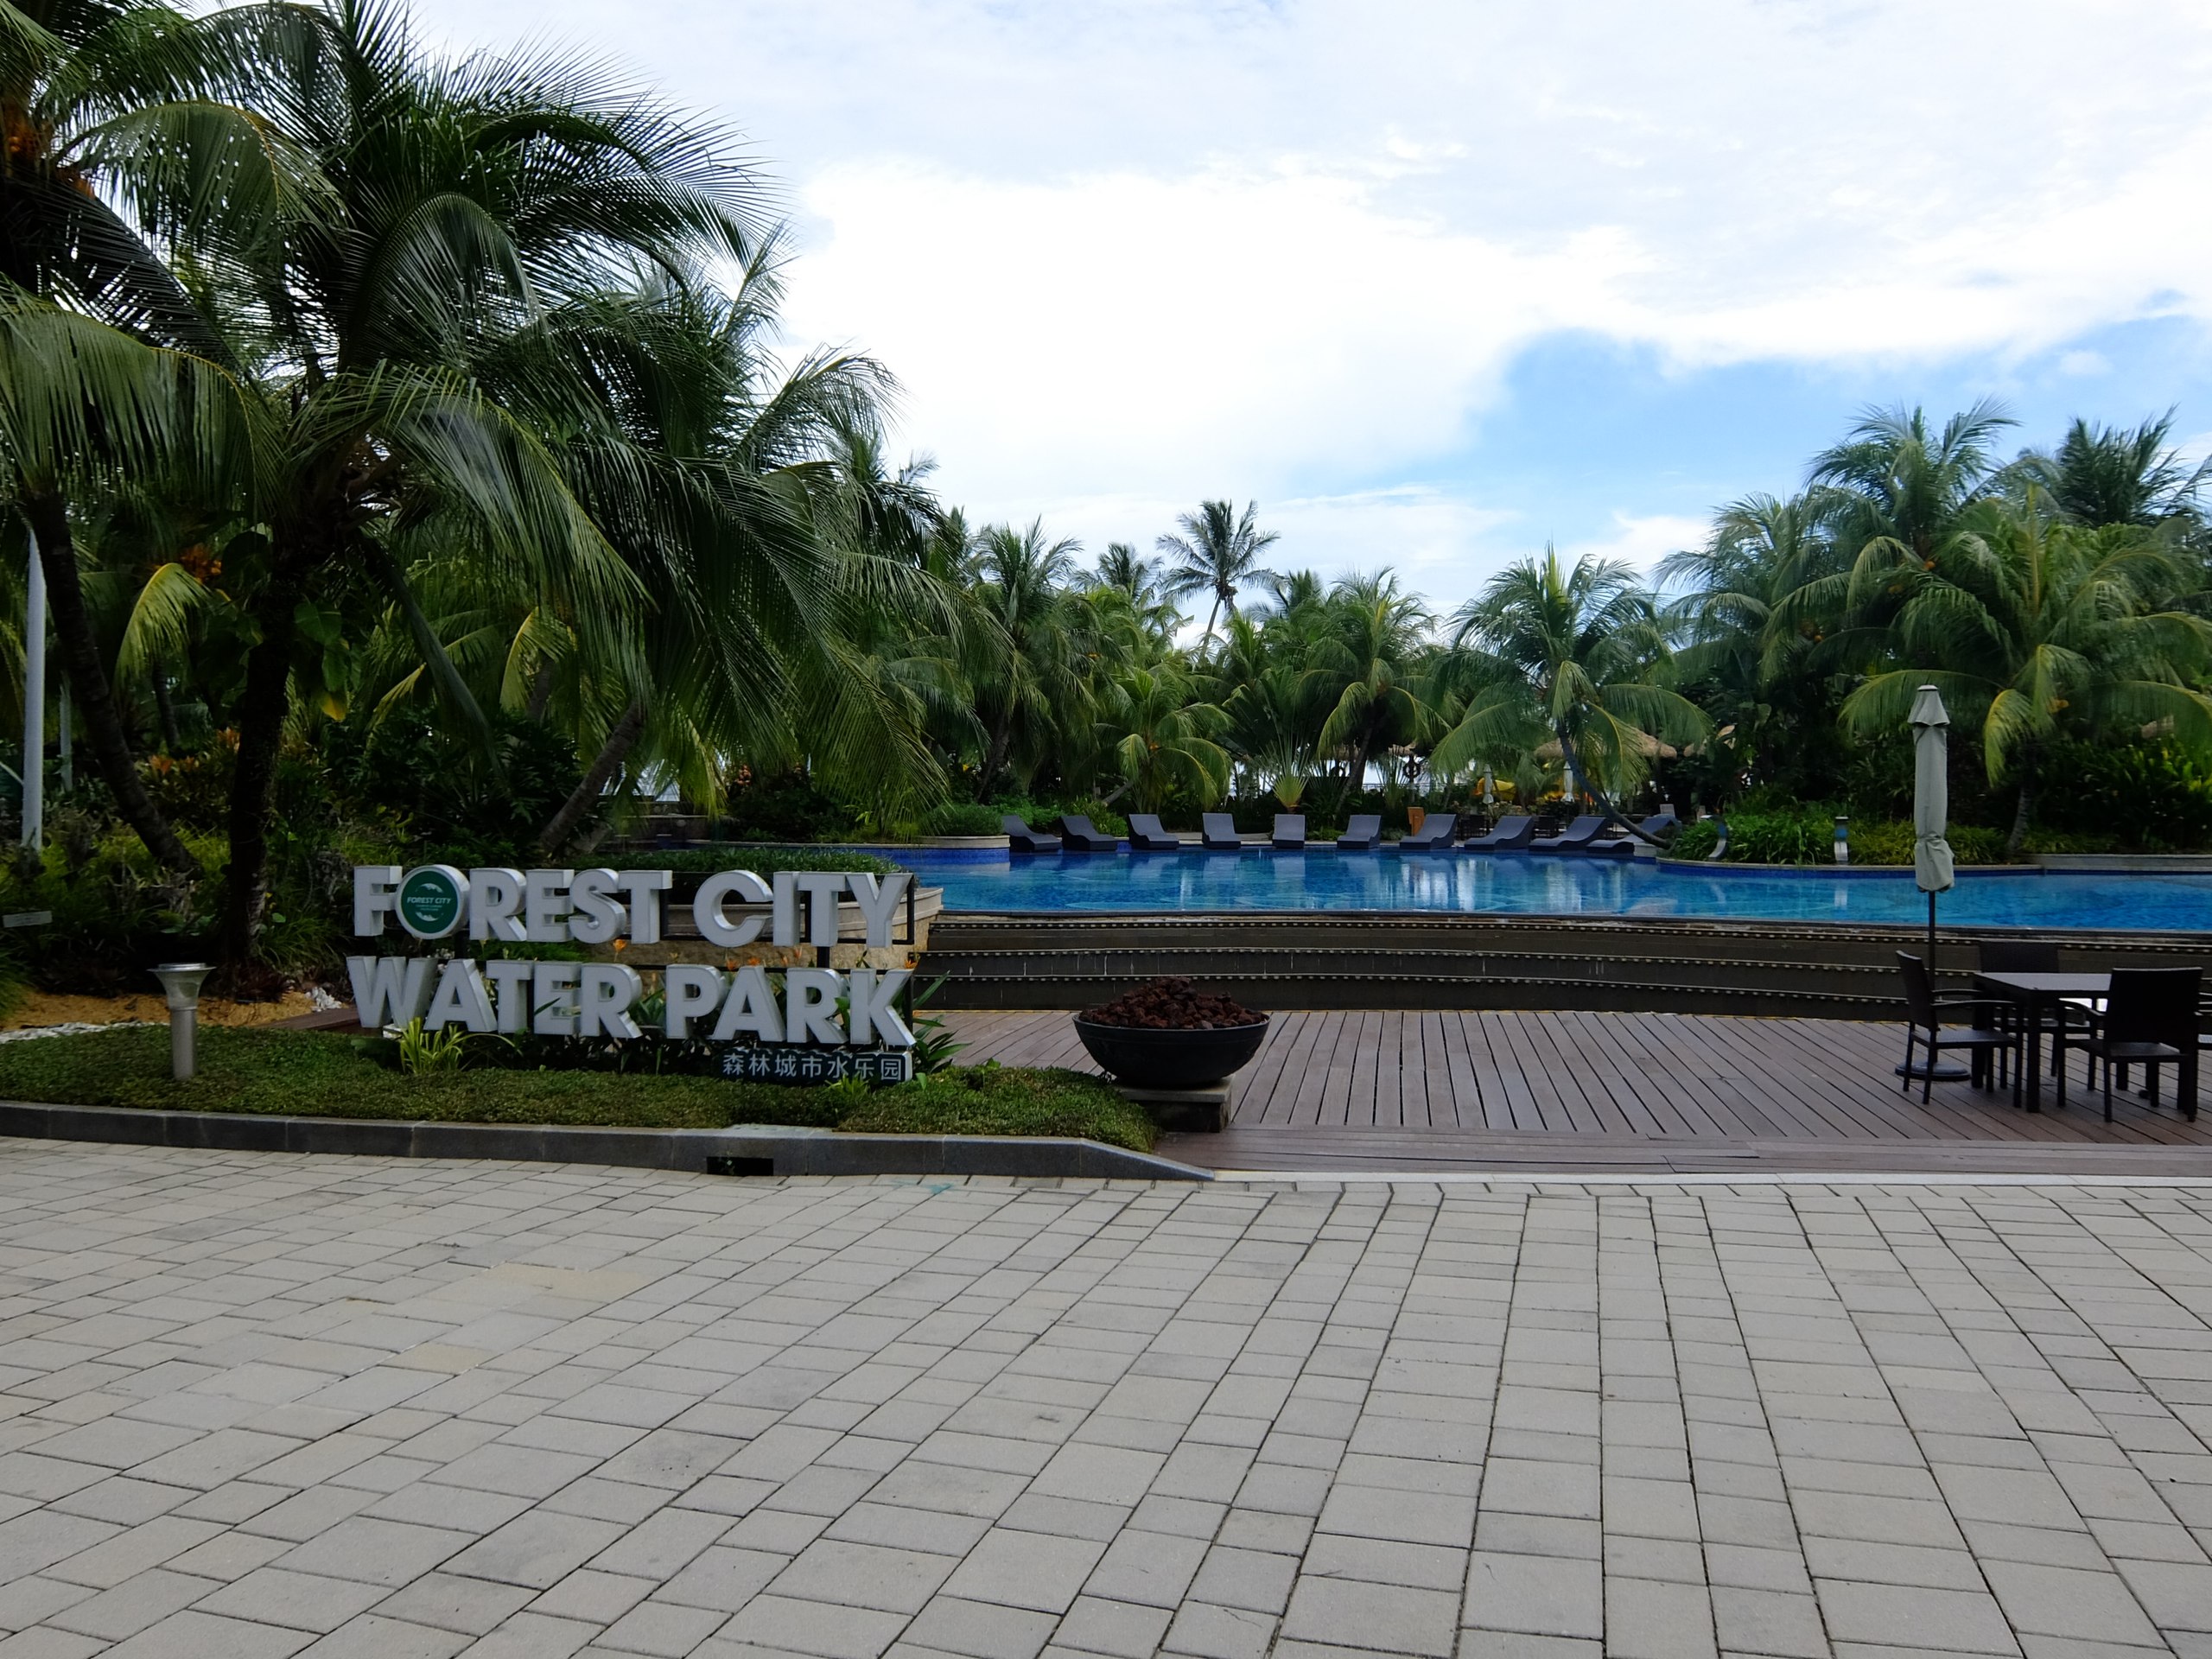 Forest city water park